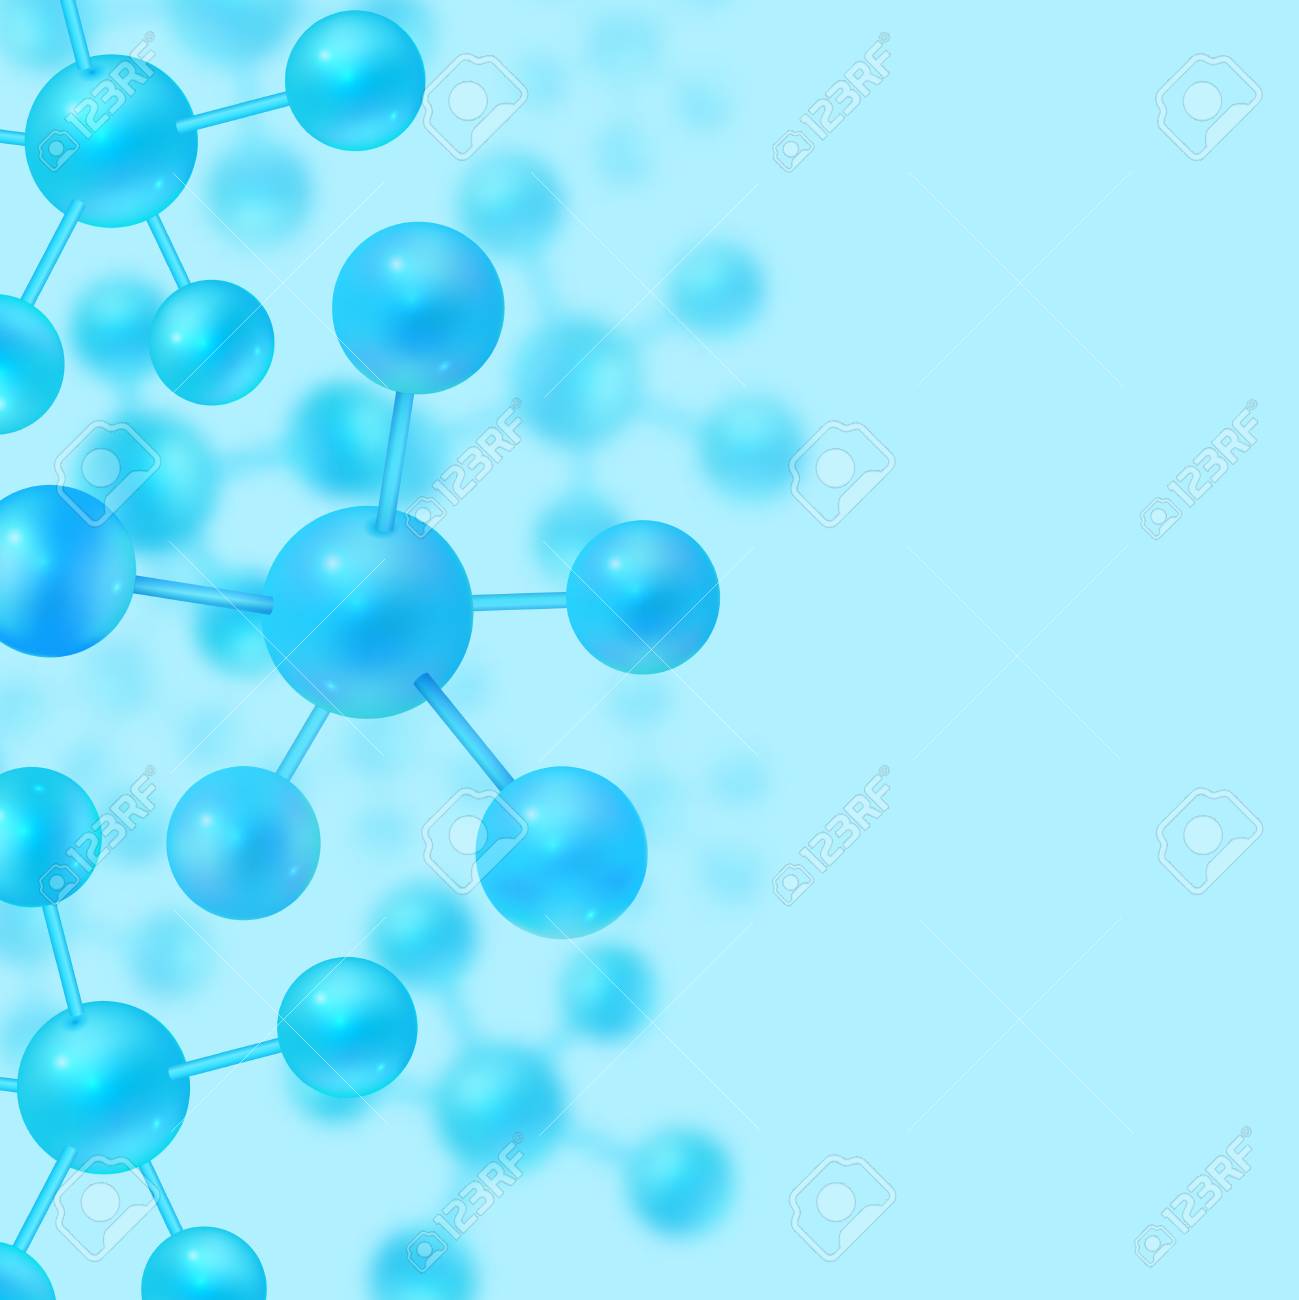 Abstract Blue Science Chemistry Biology Or Physics Background